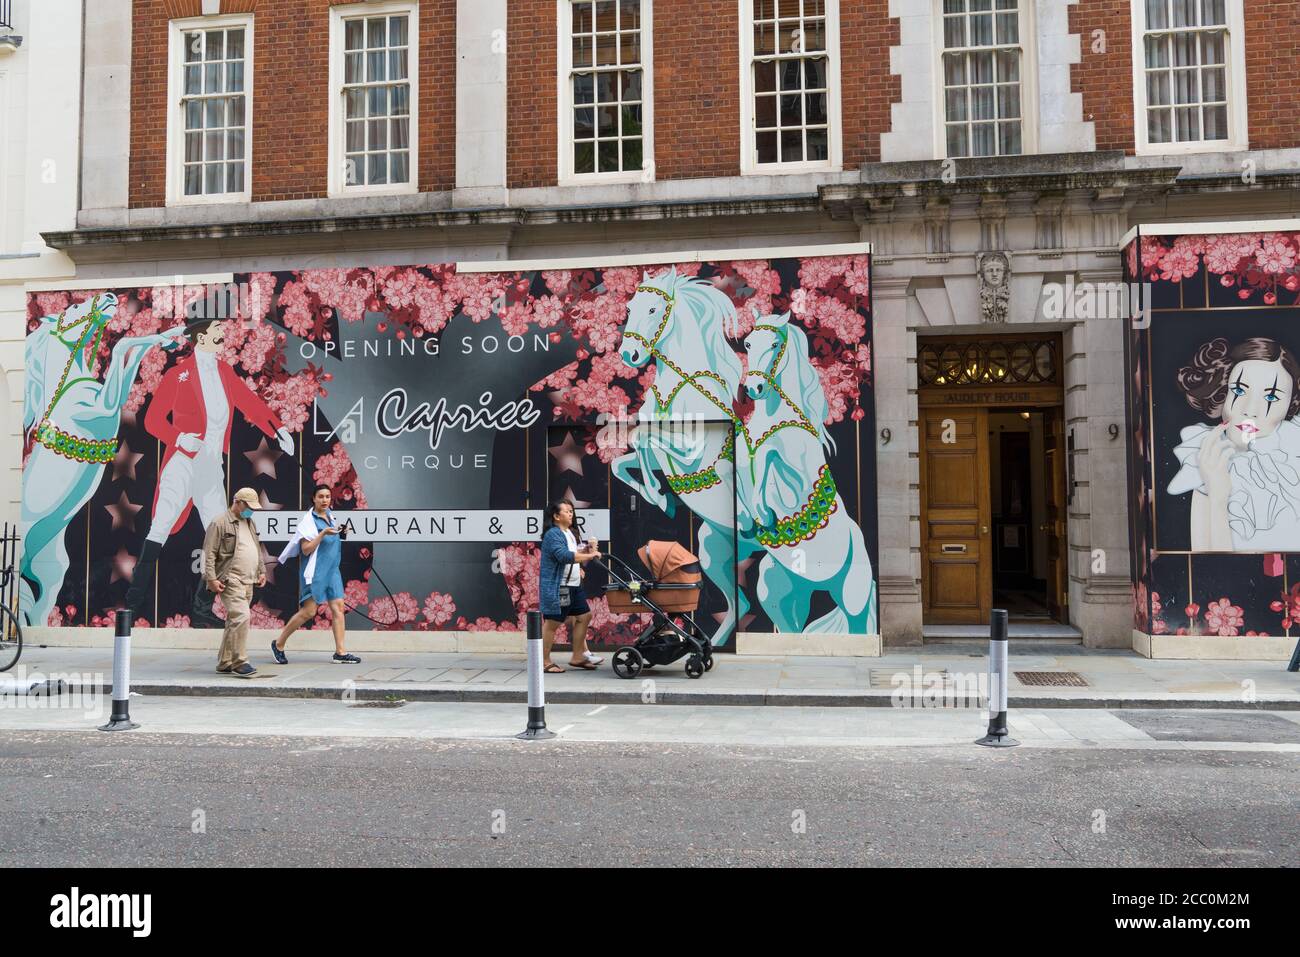 Decorative hoardings at the site of the development of the new La Caprice Cirque restaurant and bar in North Audley Street, Mayfair, London, England Stock Photo